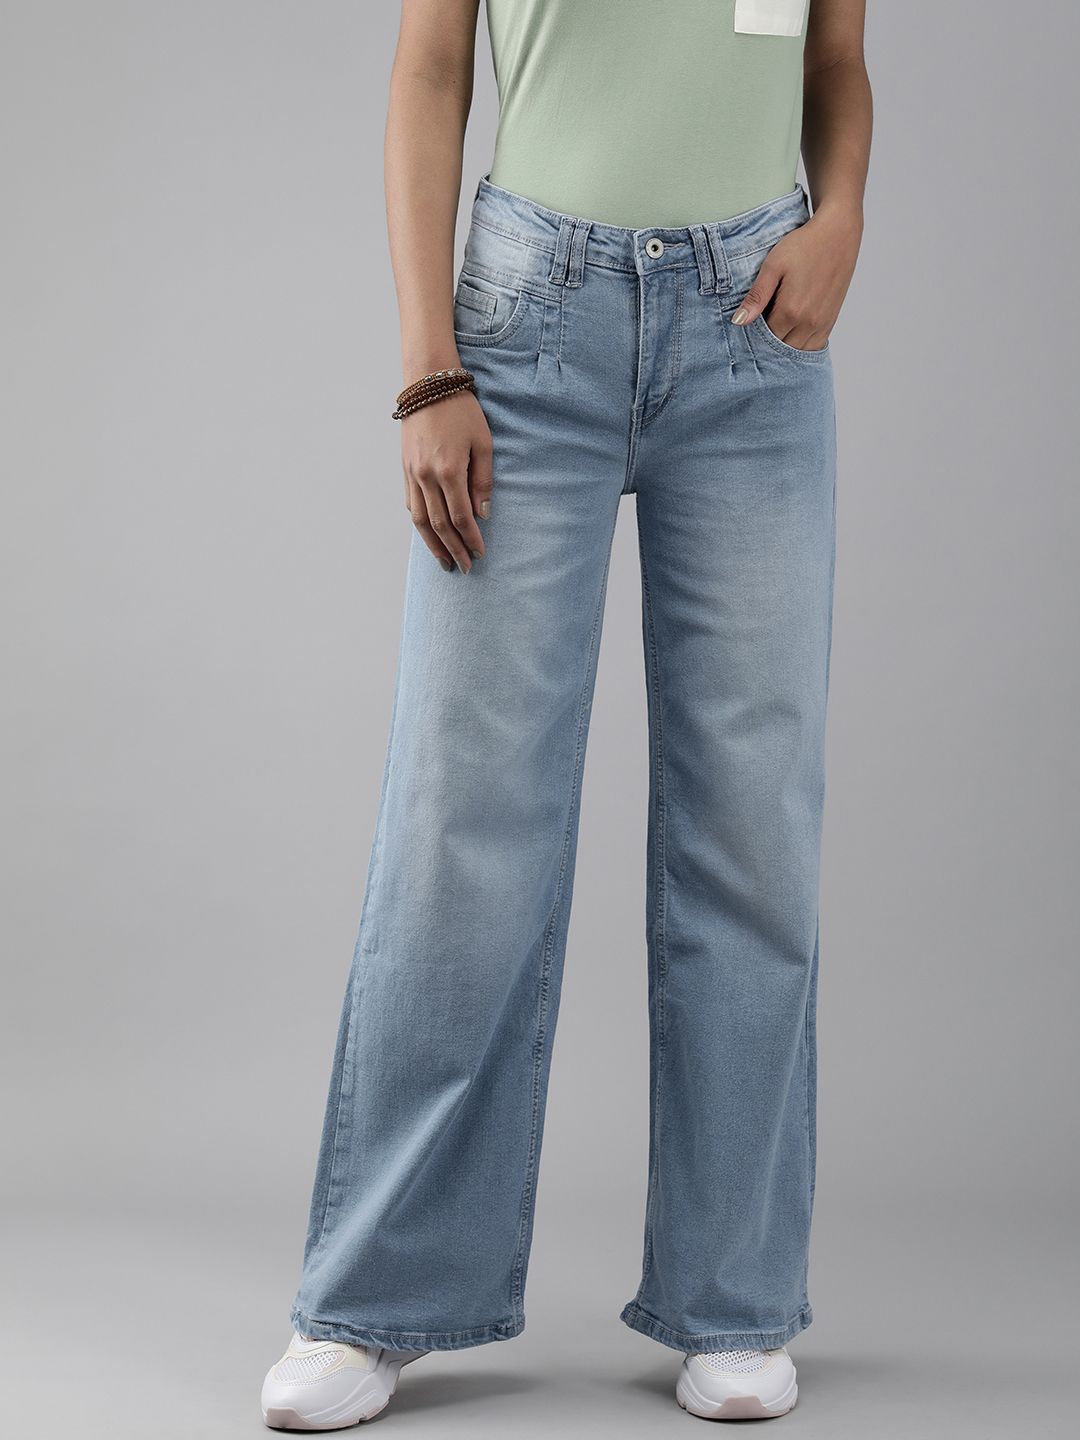 The Roadster Lifestyle Co Women Blue Wide Leg Light Fade Pleat Detail Stretchable Jeans Price in India